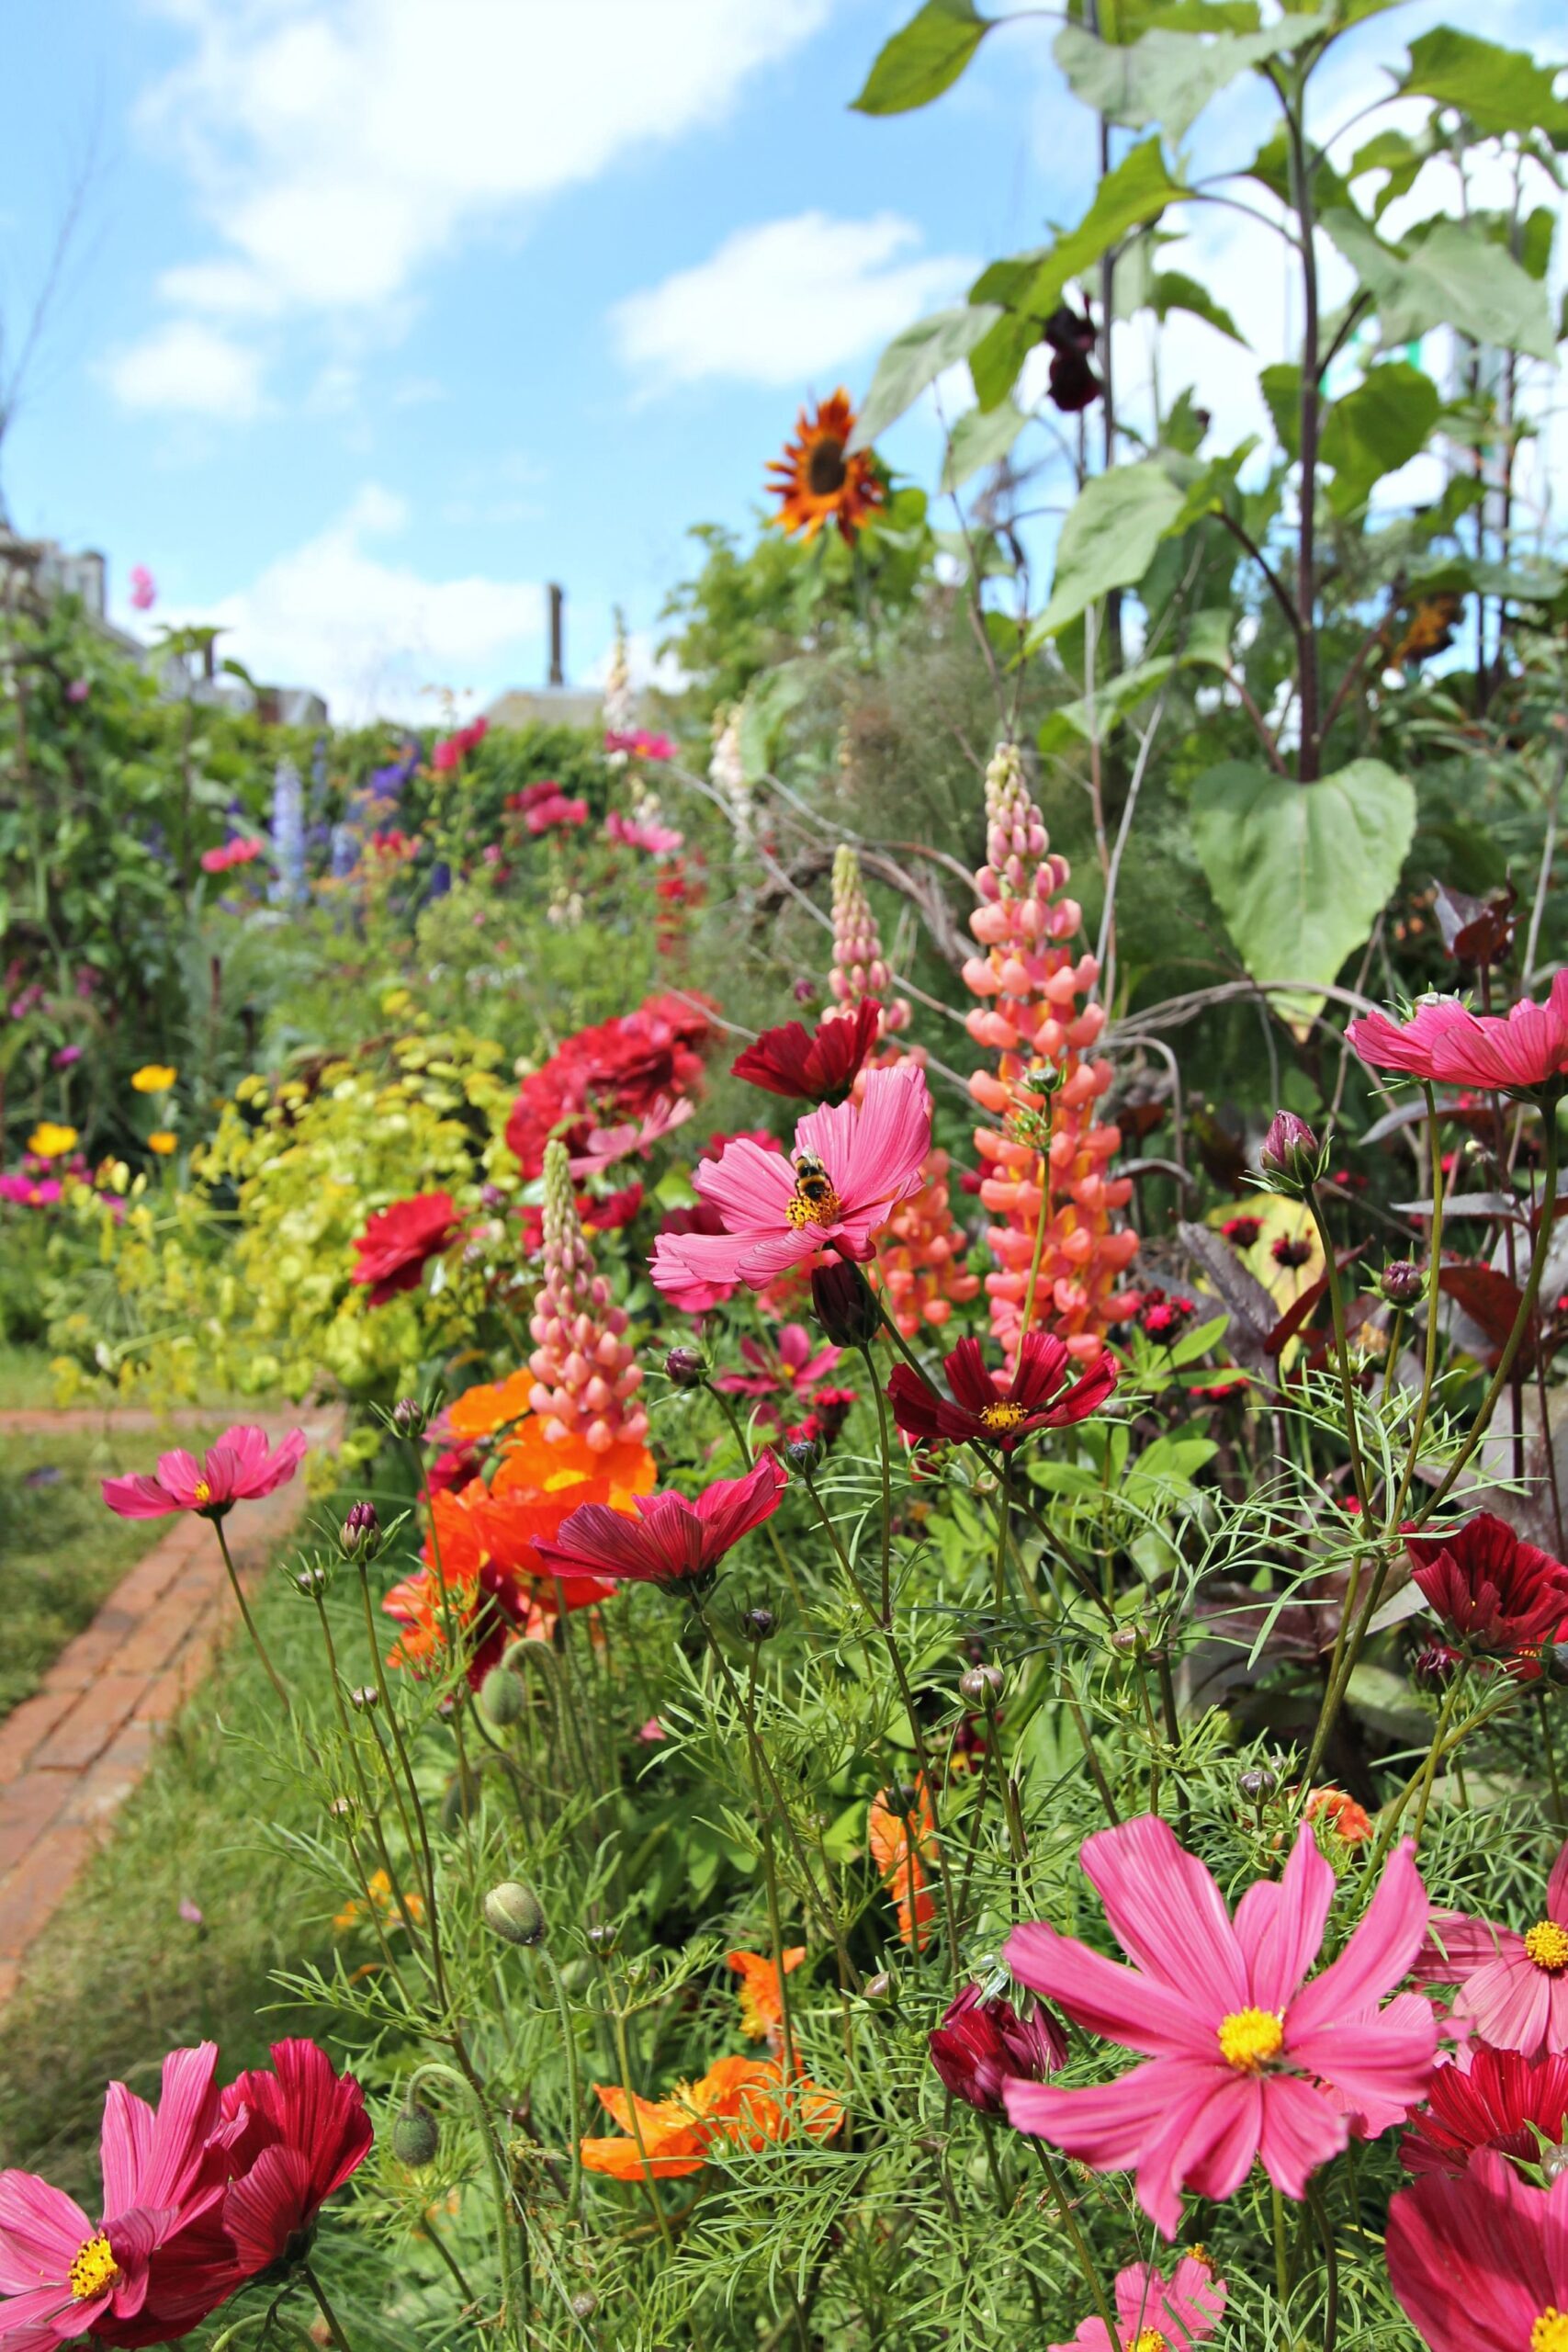 Creating a Vibrant Garden with a Variety of Beautiful Flowers